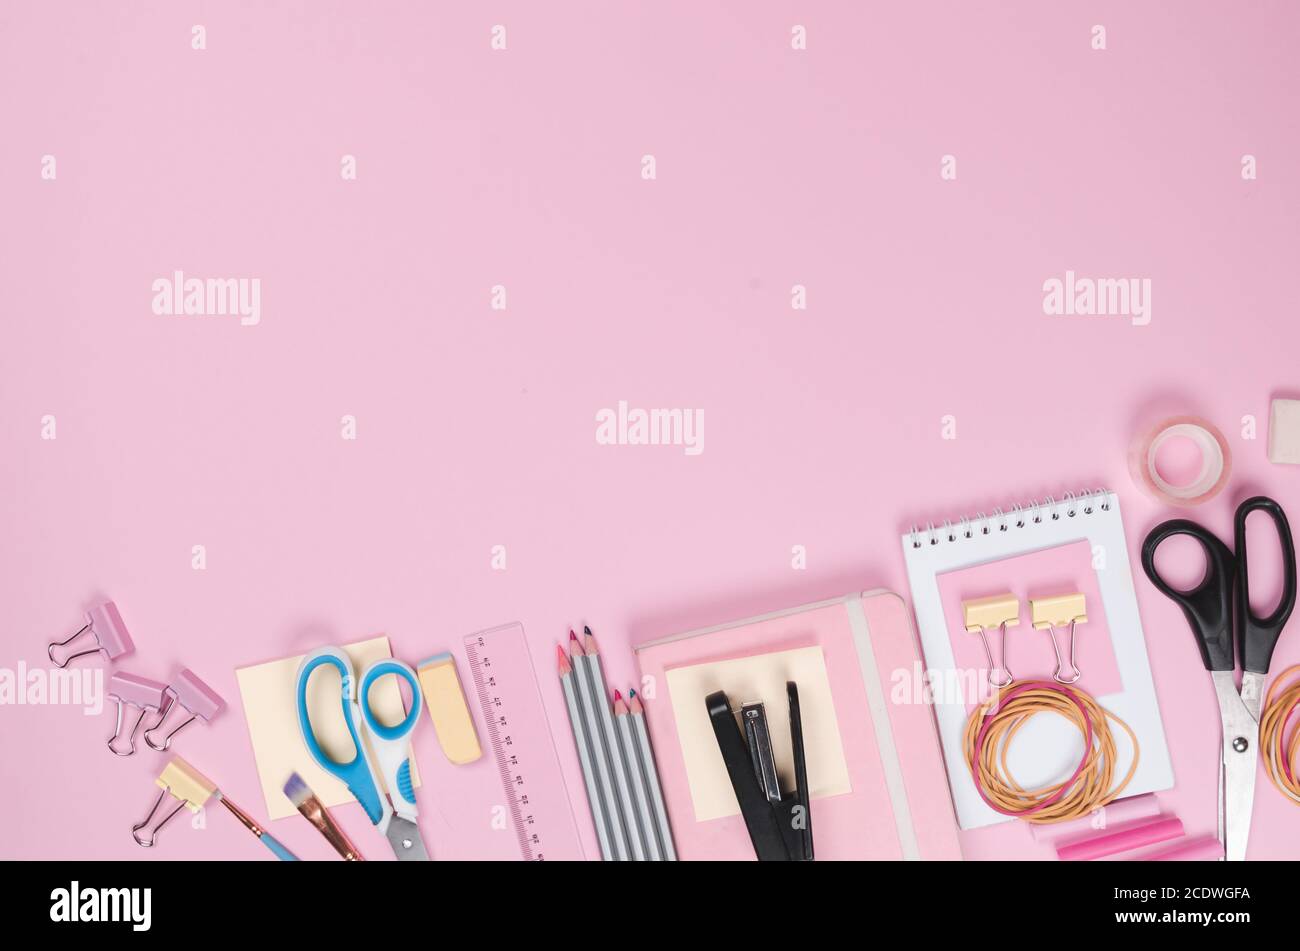 On a pink background, pink school supplies, a calculator, cheat